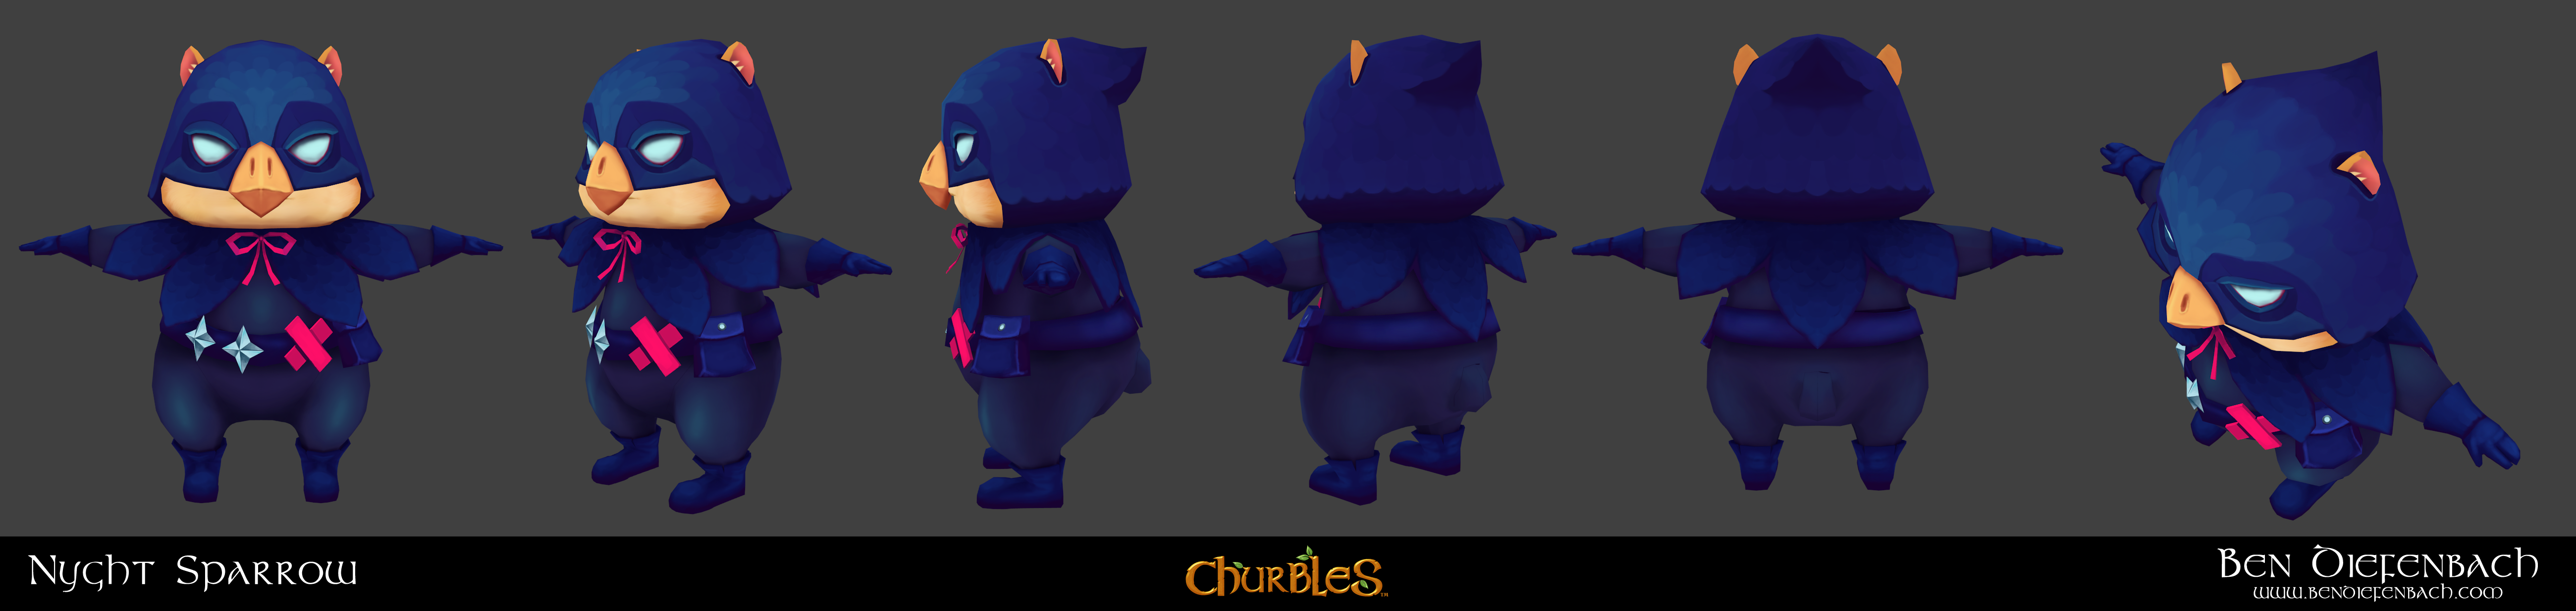 churbles__nyght_sparrow_by_darkmag07-d8fqsk4.png